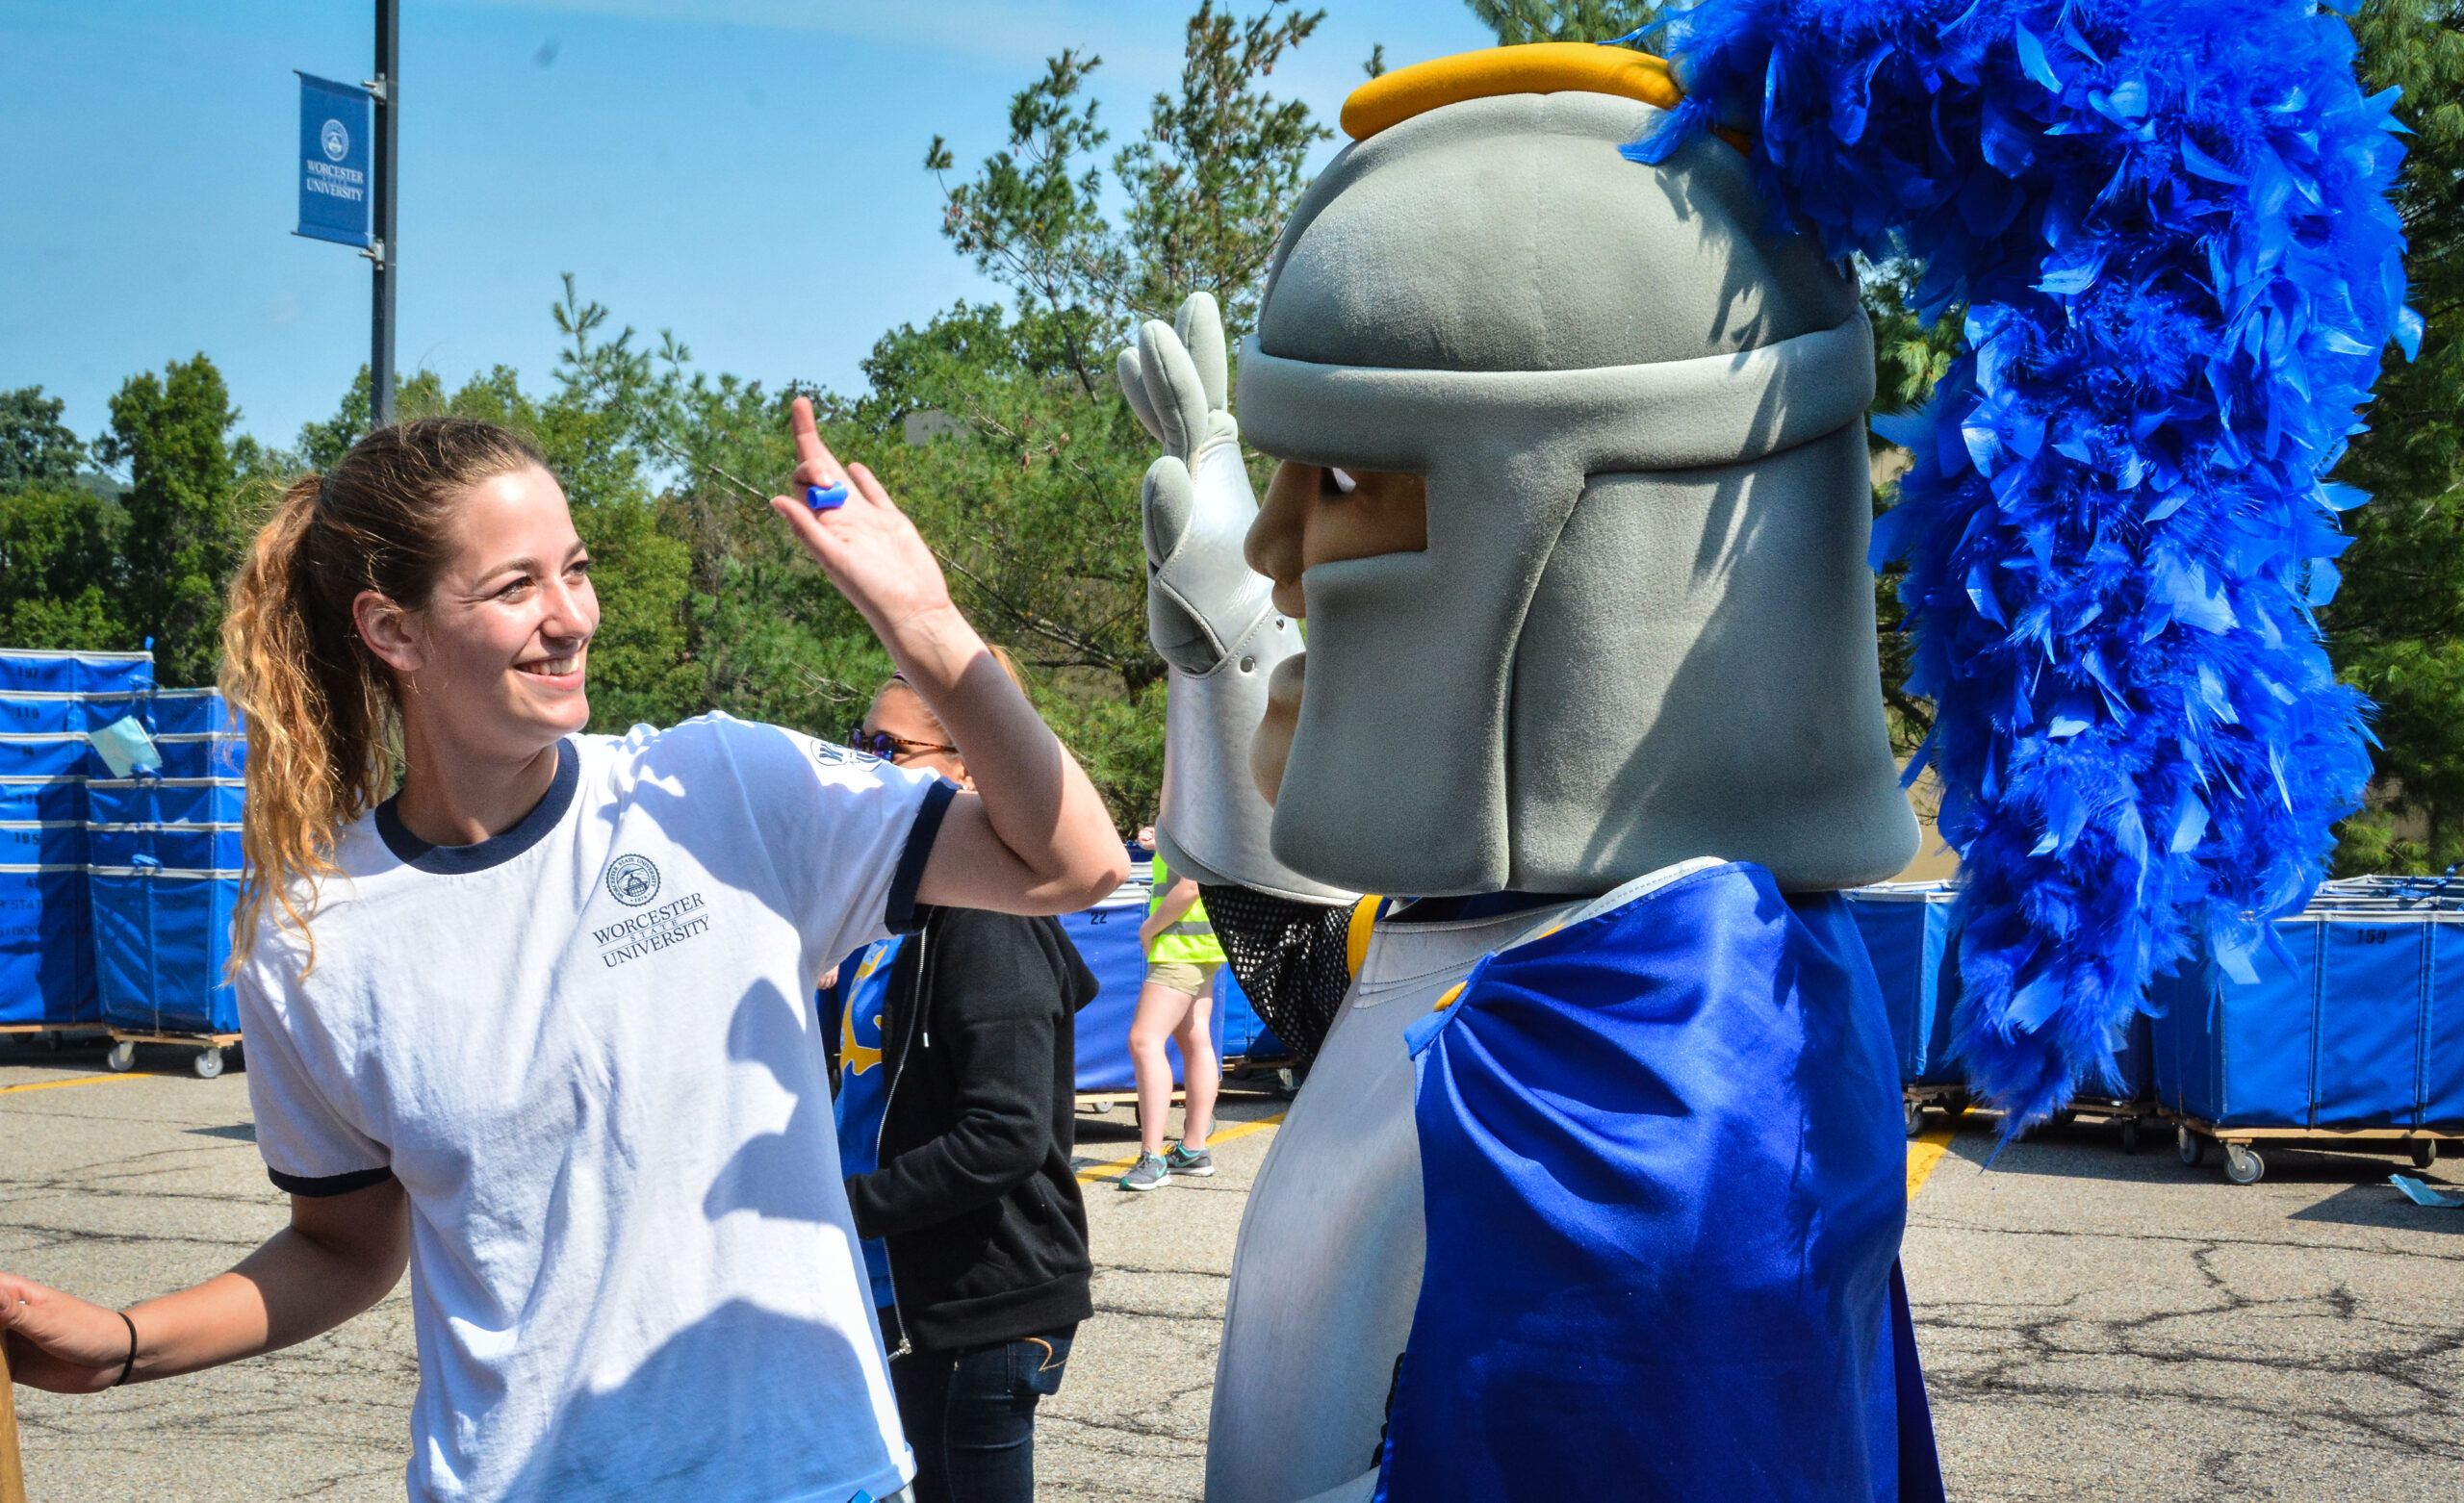 A student high fiving the school mascot, Chandler the lancer